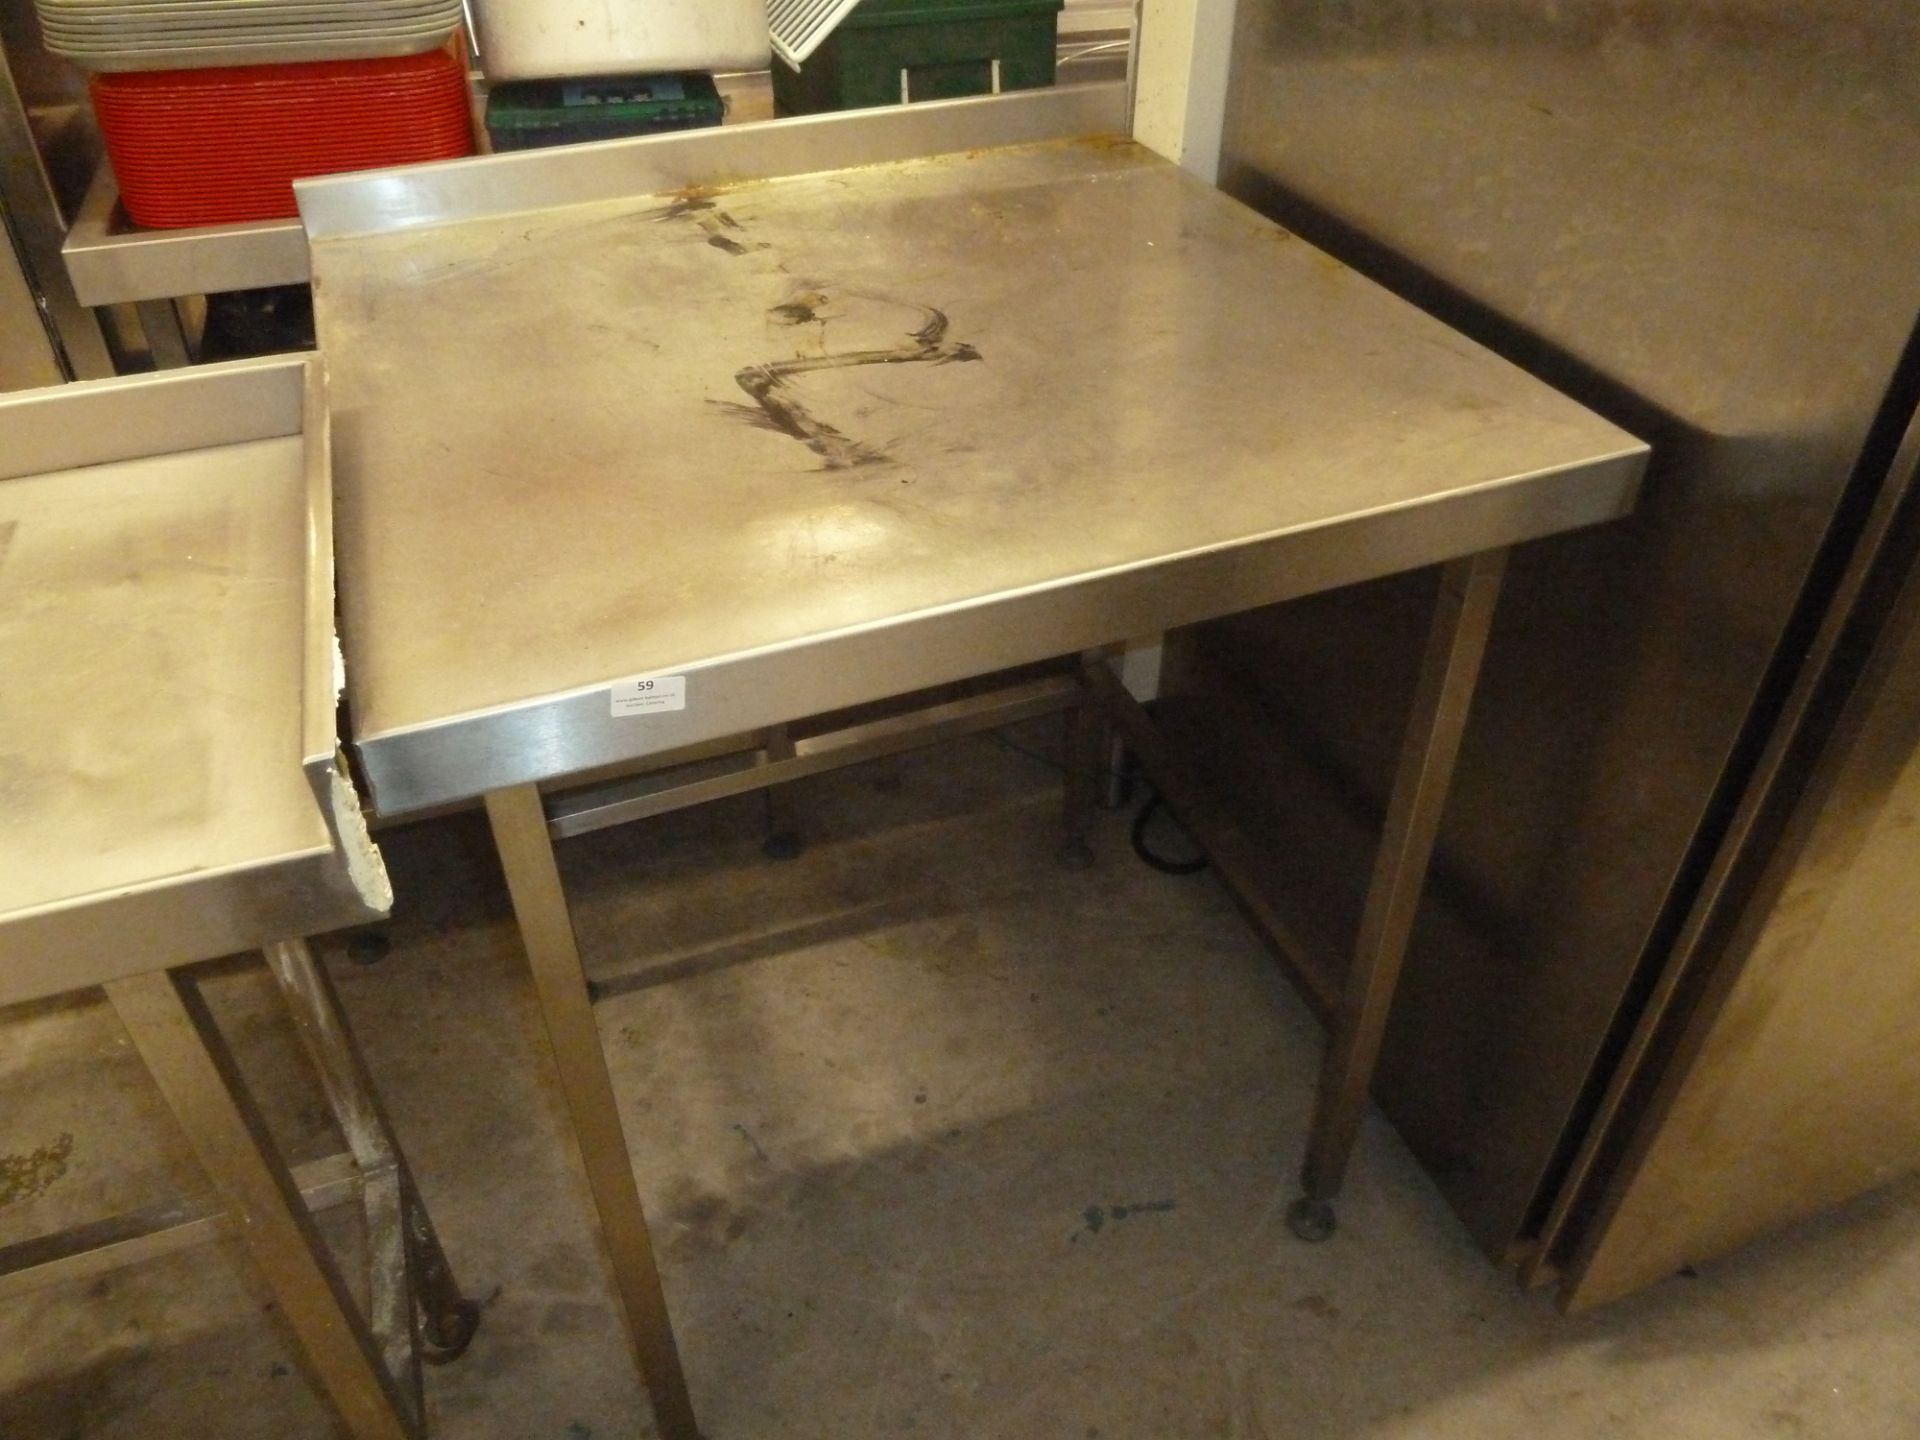 * S/S square prep bench with upstand and 600 x 600 space for undercounter appliance. 800w x 800d x 9